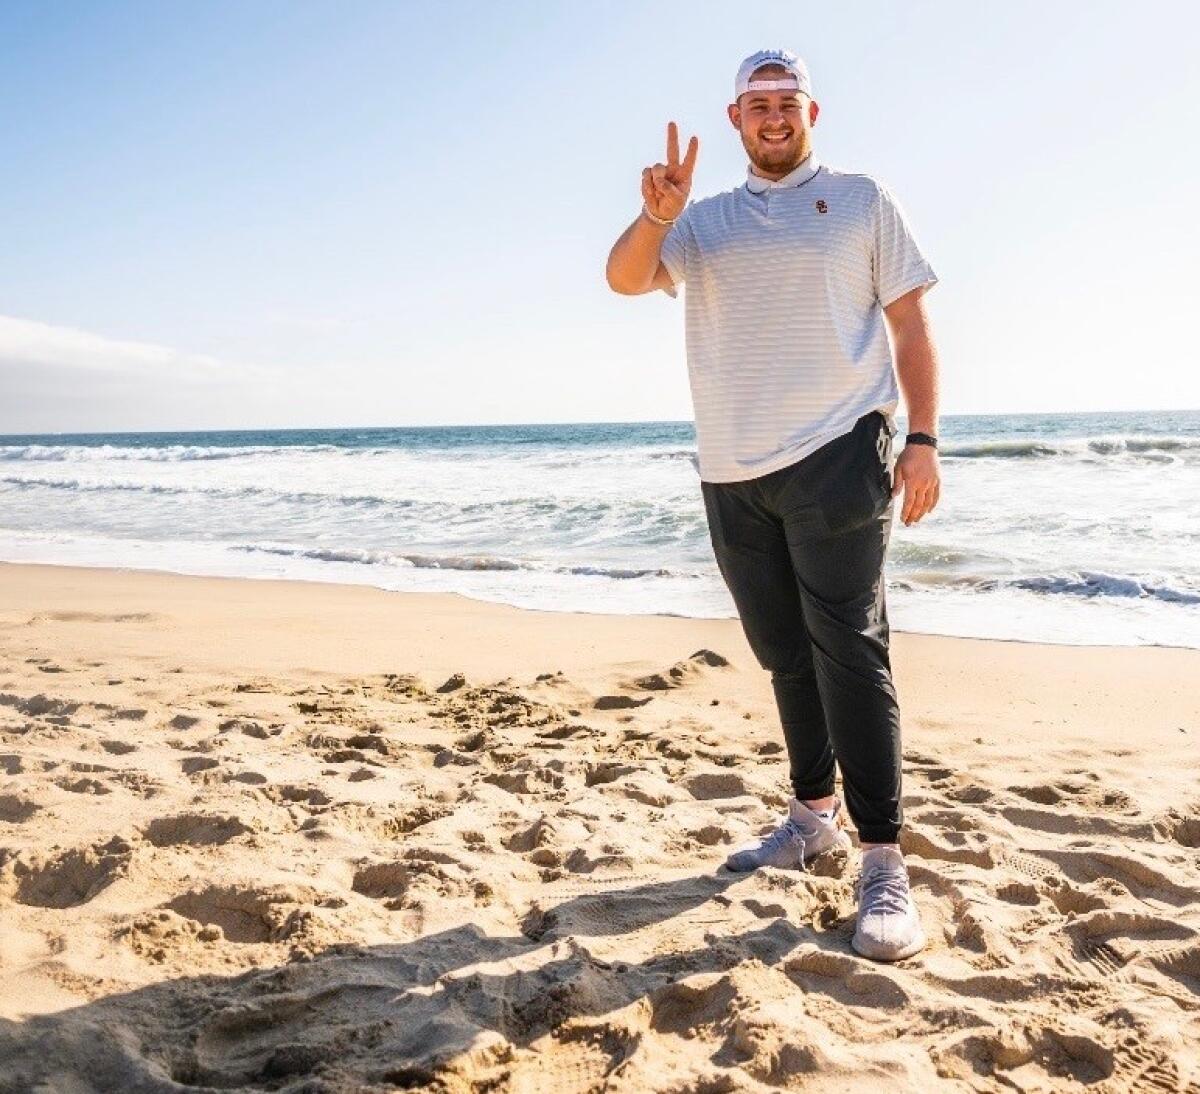 Cooper Lovelace makes the peace sign, or USC victory sign, with his fingers as he stands on a beach.